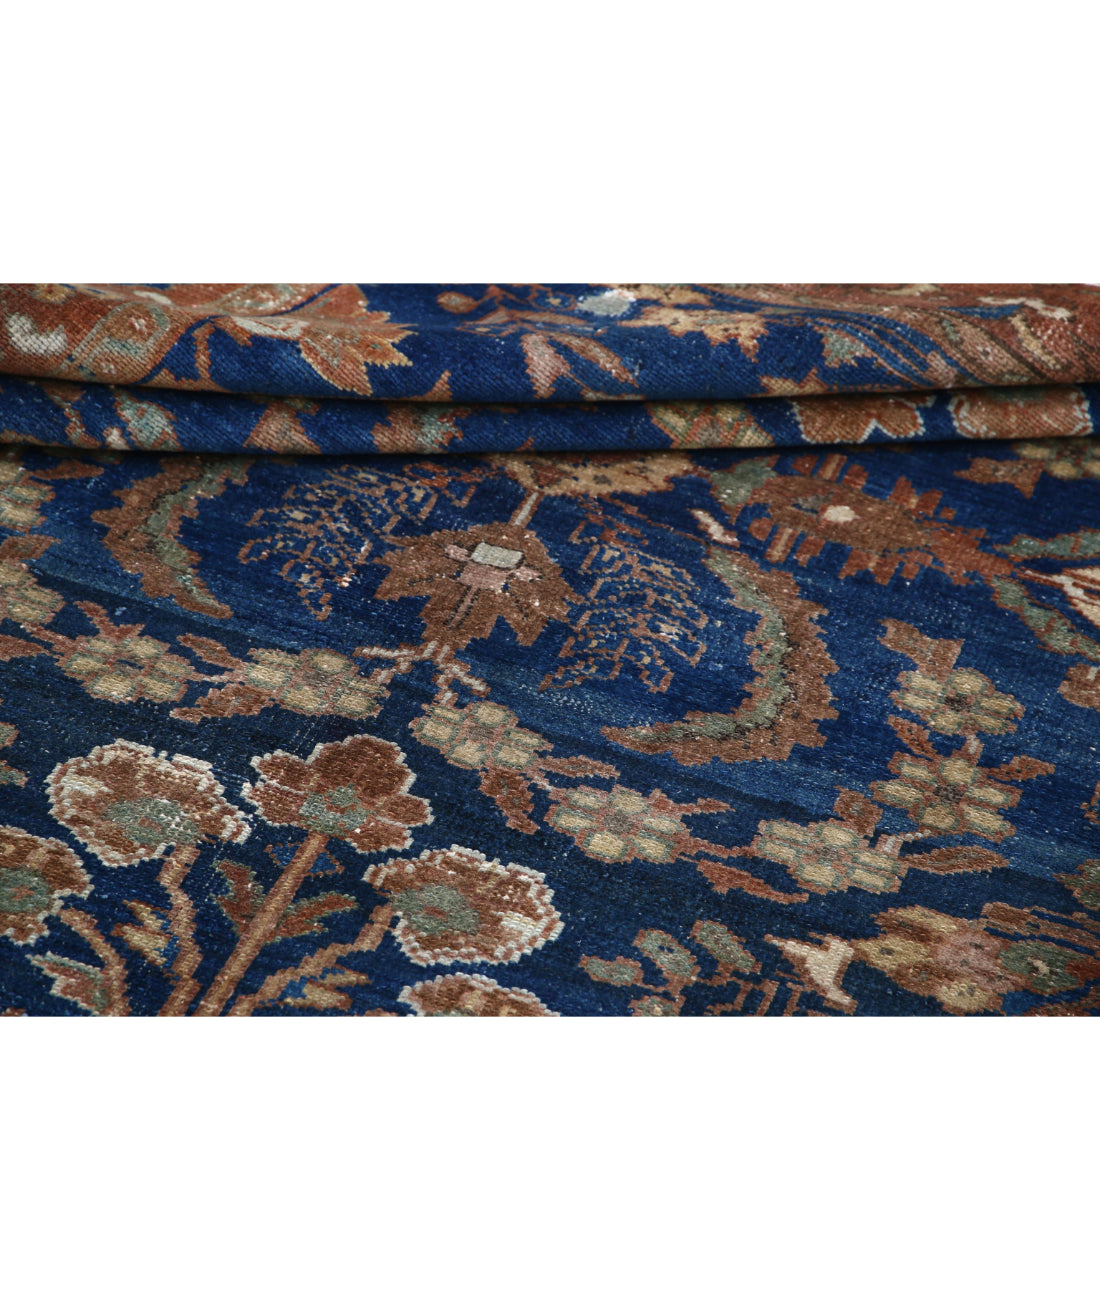 Hand Knotted Vintage Persian Hamadan Wool Rug - 4'6'' x 10'1'' 4'6'' x 10'1'' (135 X 303) / Blue / Brown